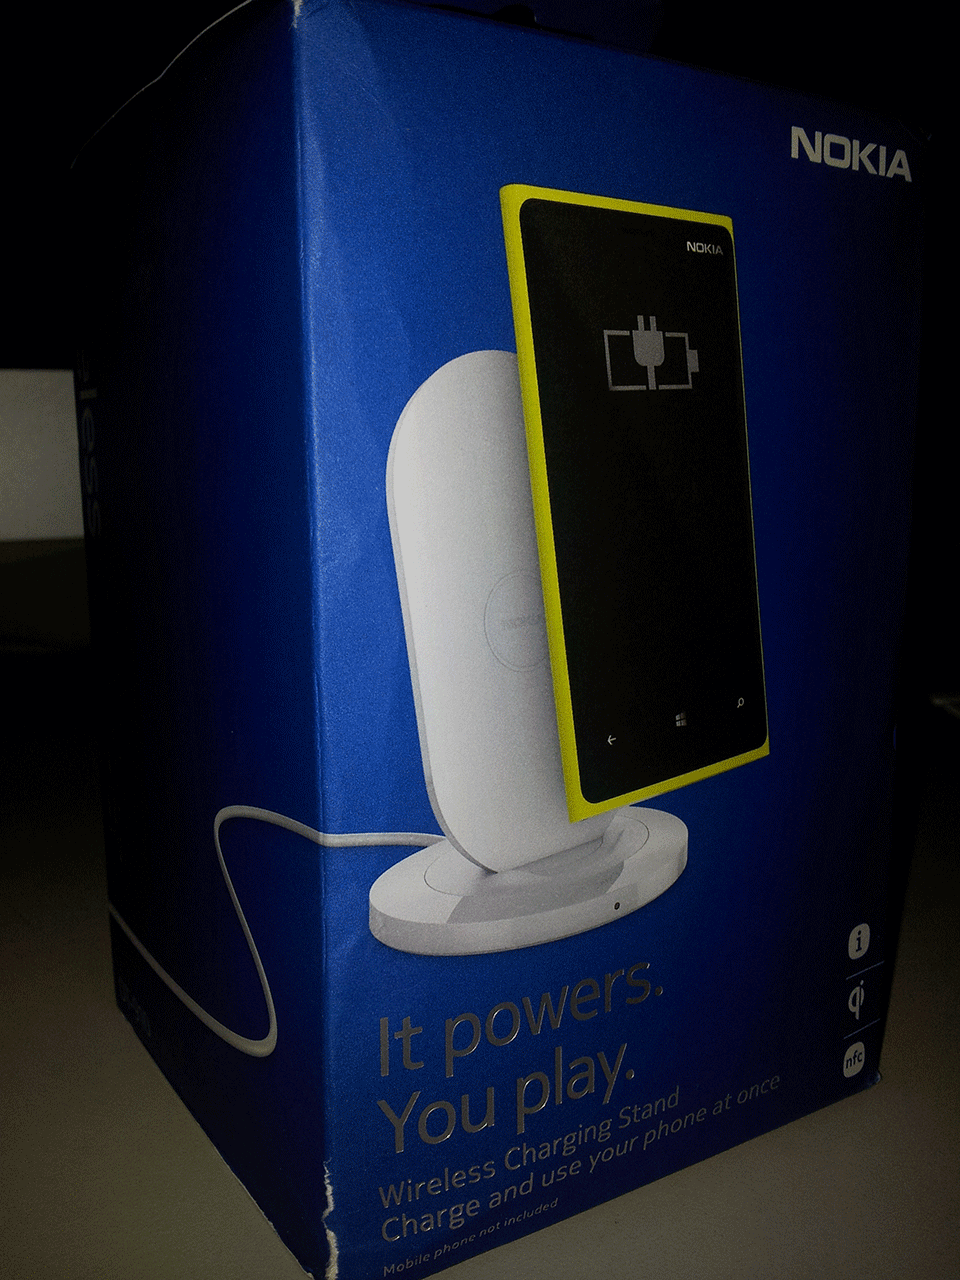 Malaysia Nokia Wireless Charging Stand DT-910 In A Box